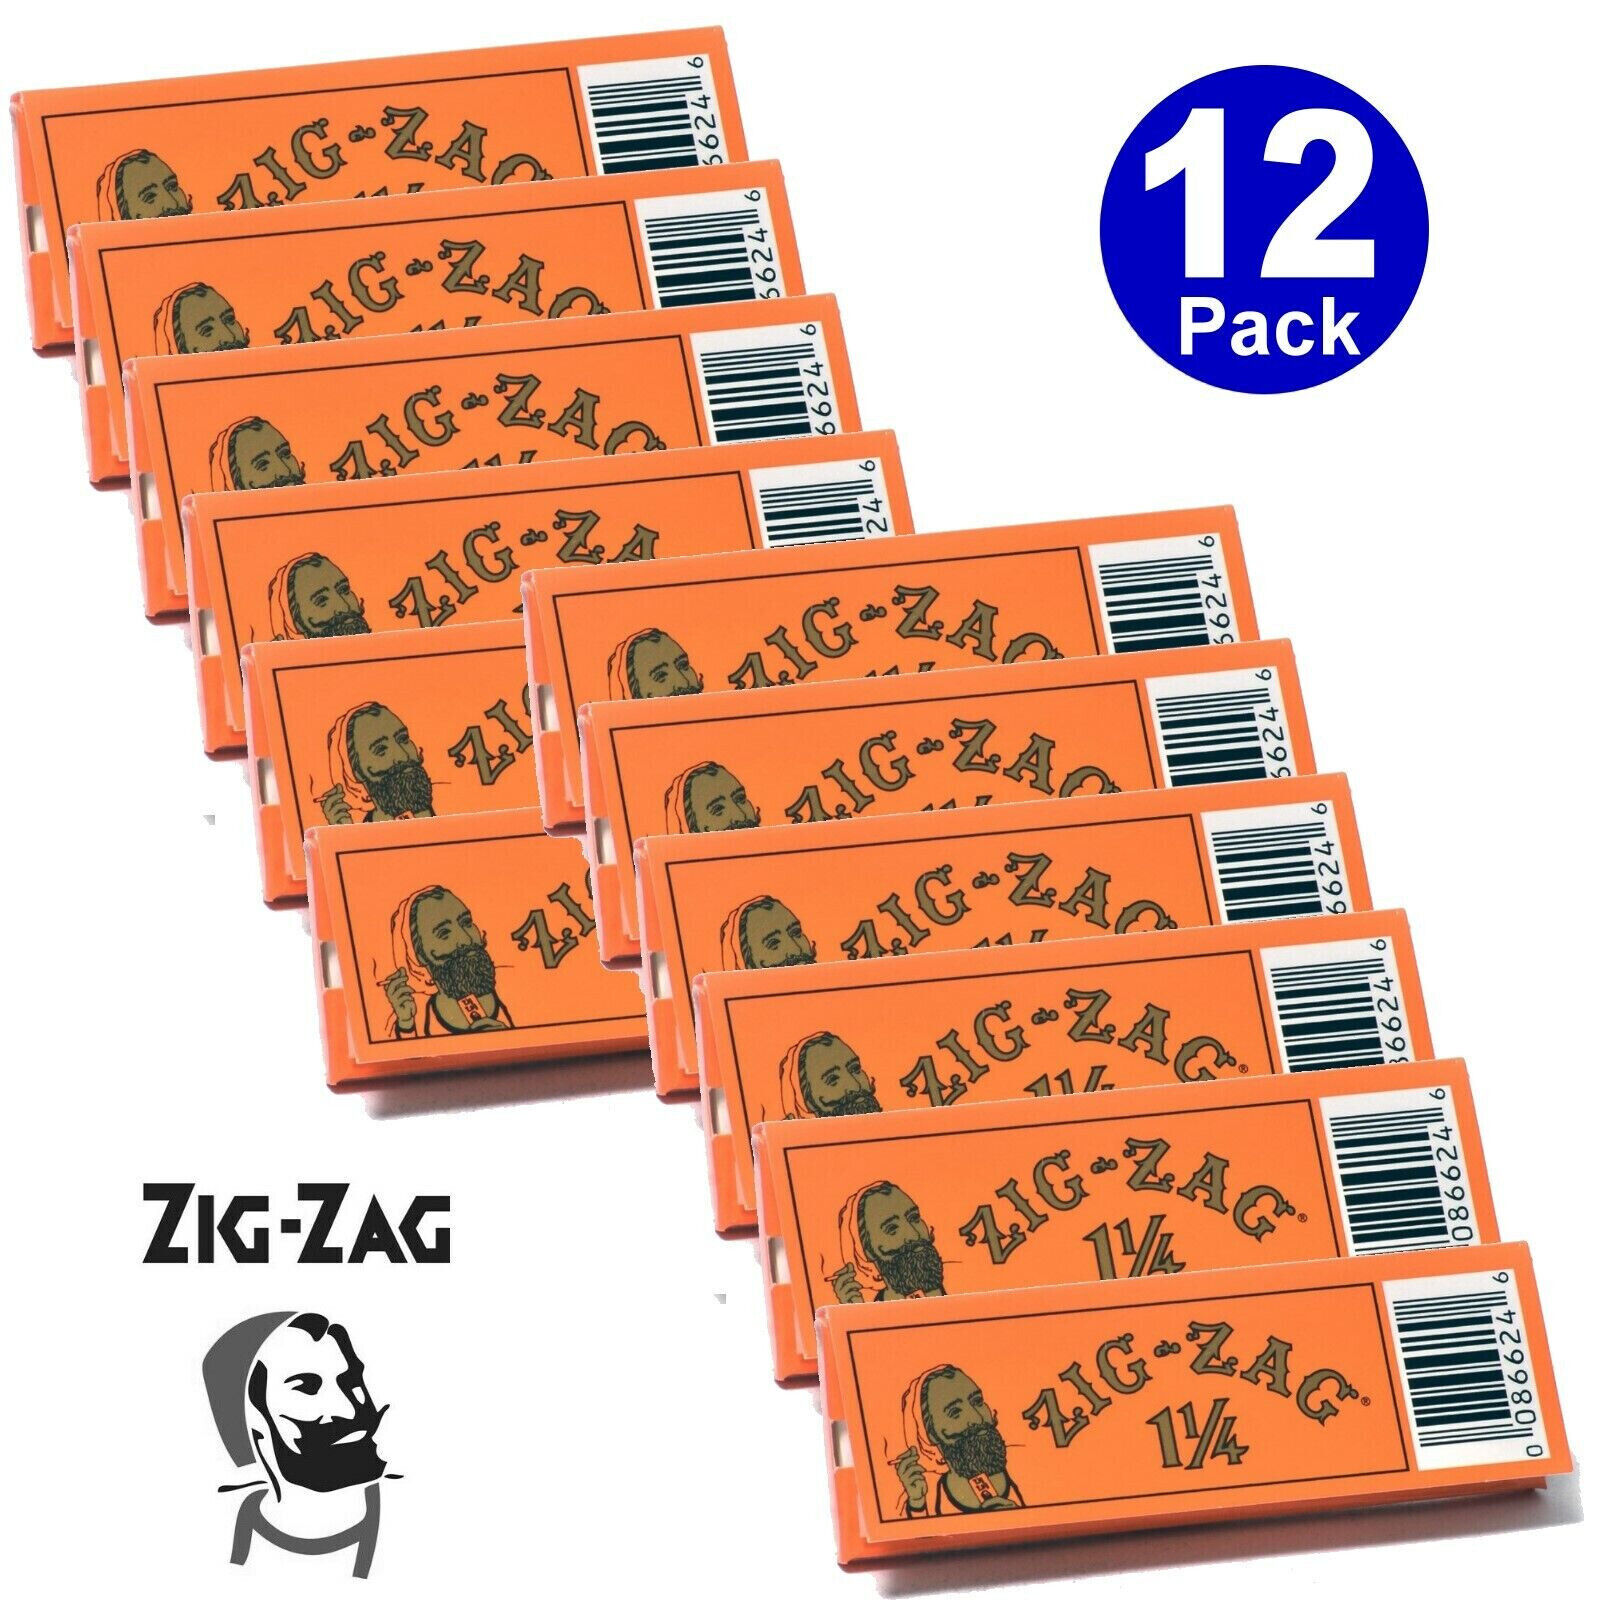 Authentic Zig-Zag  1 1/4 French Orange Rolling Papers 12 Booklets 32 Paper each